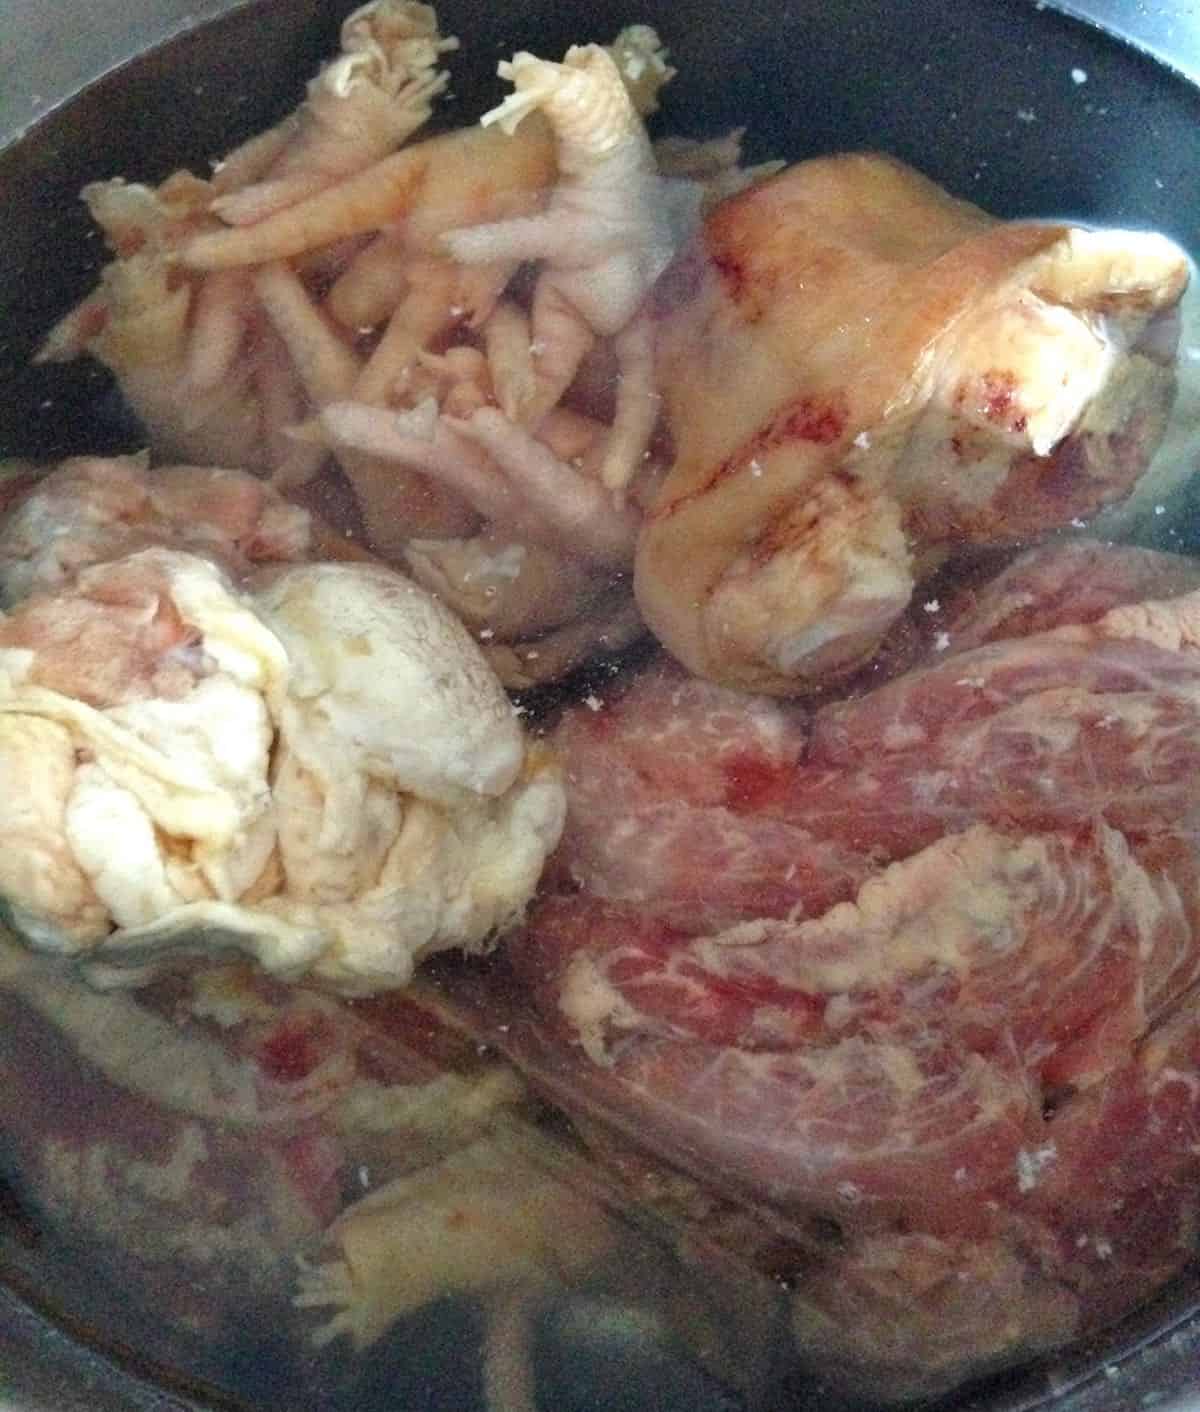 Making chicken broth with a variety of animal parts.